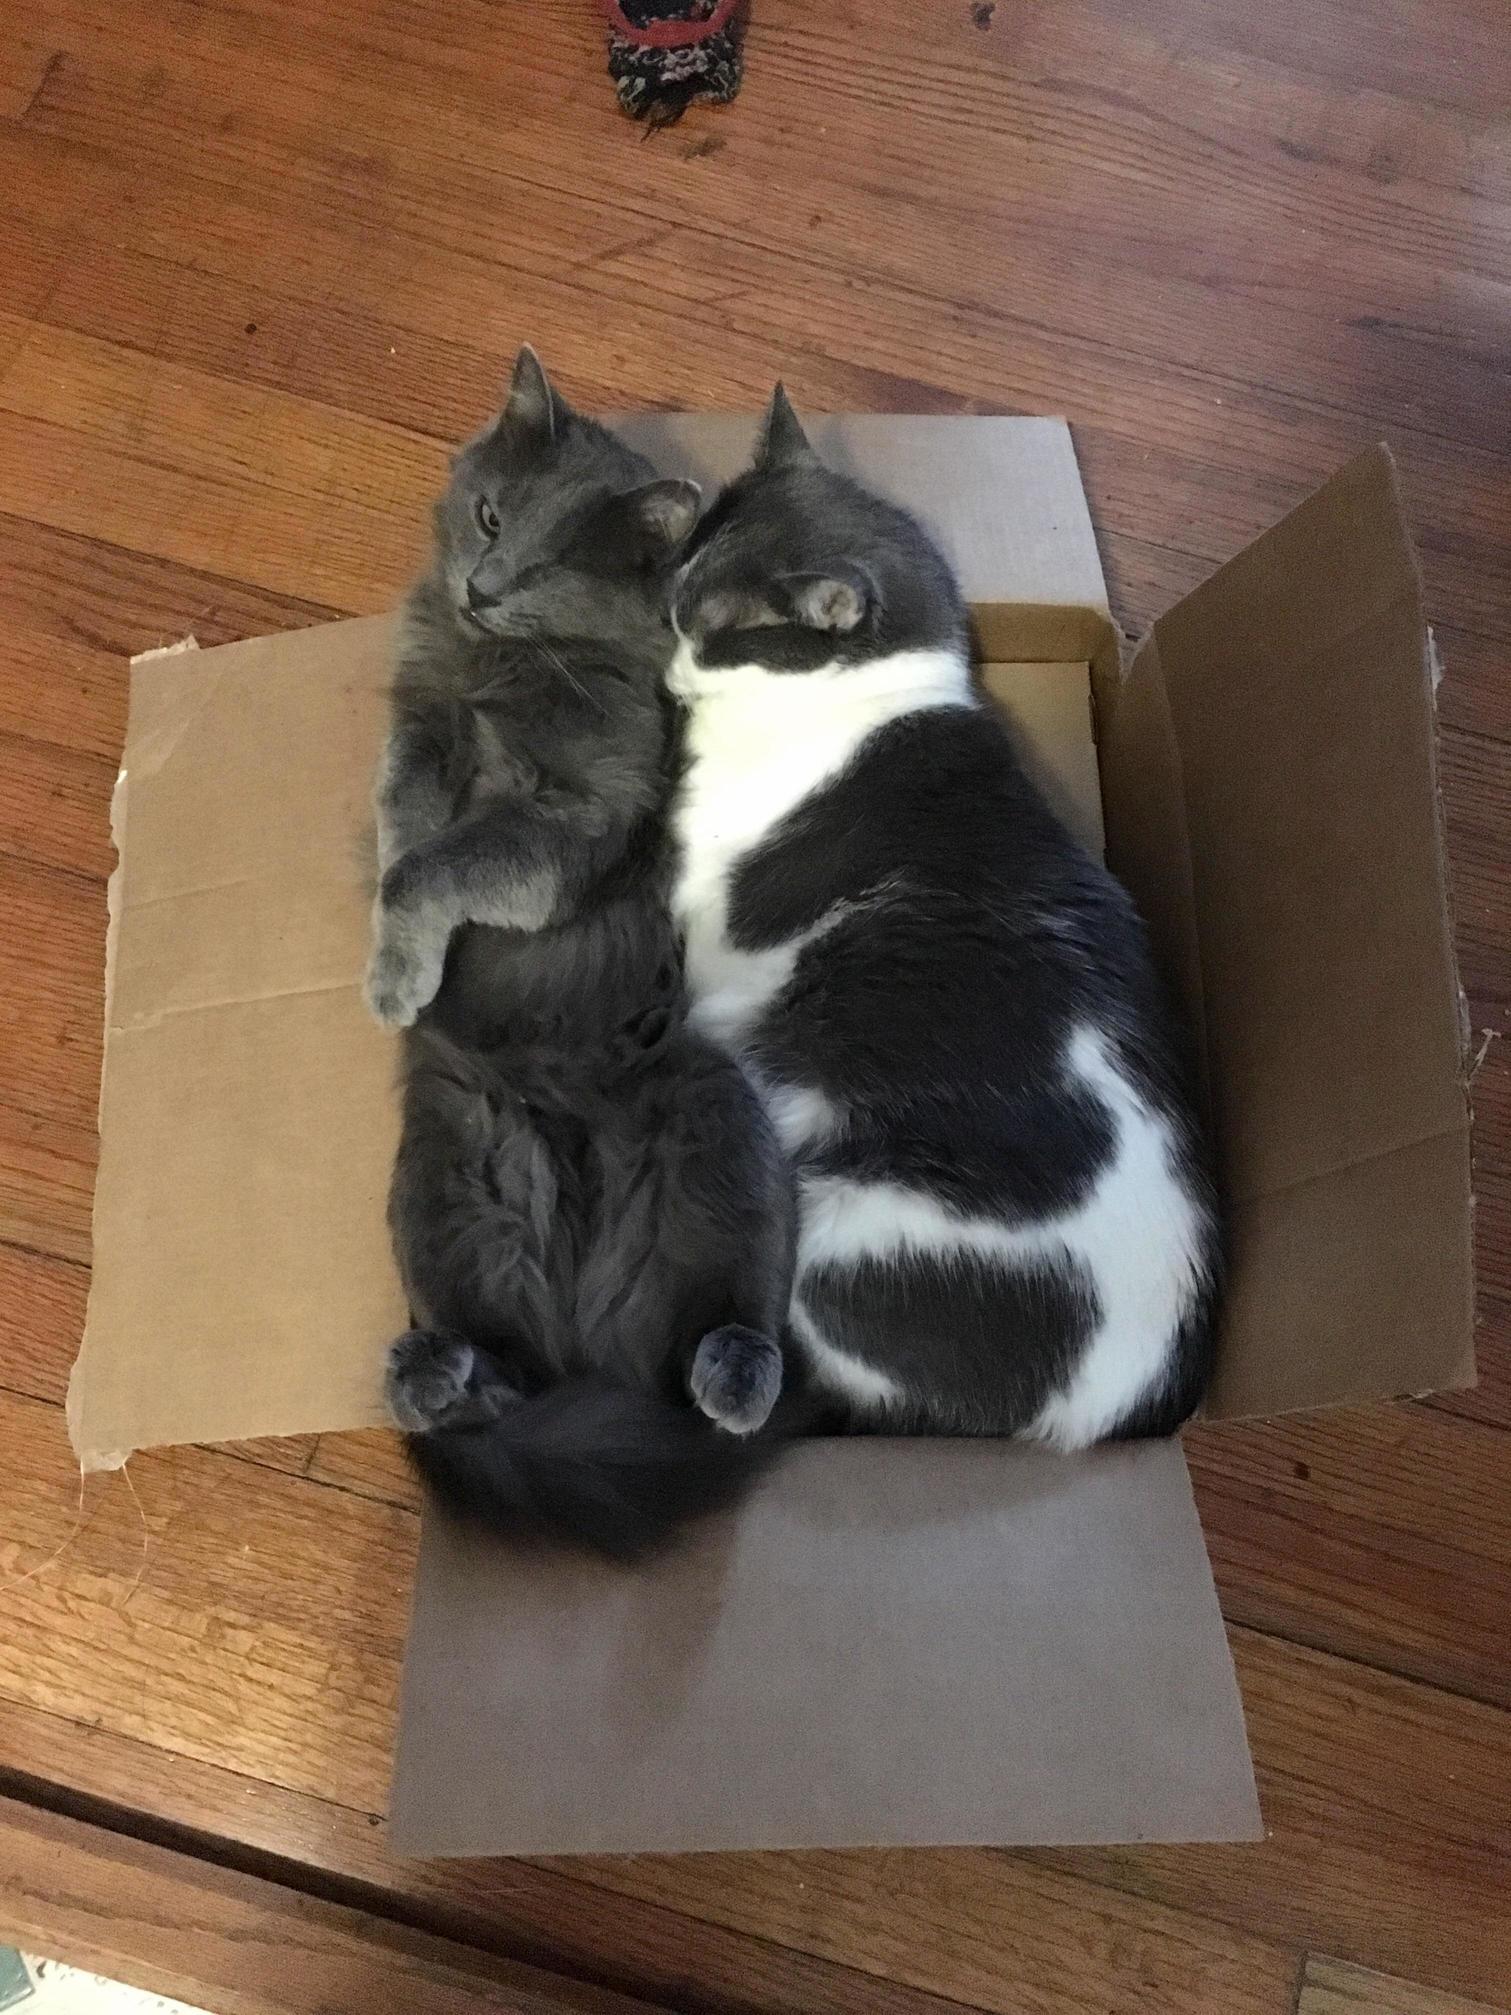 If they both fits they both sits ~)